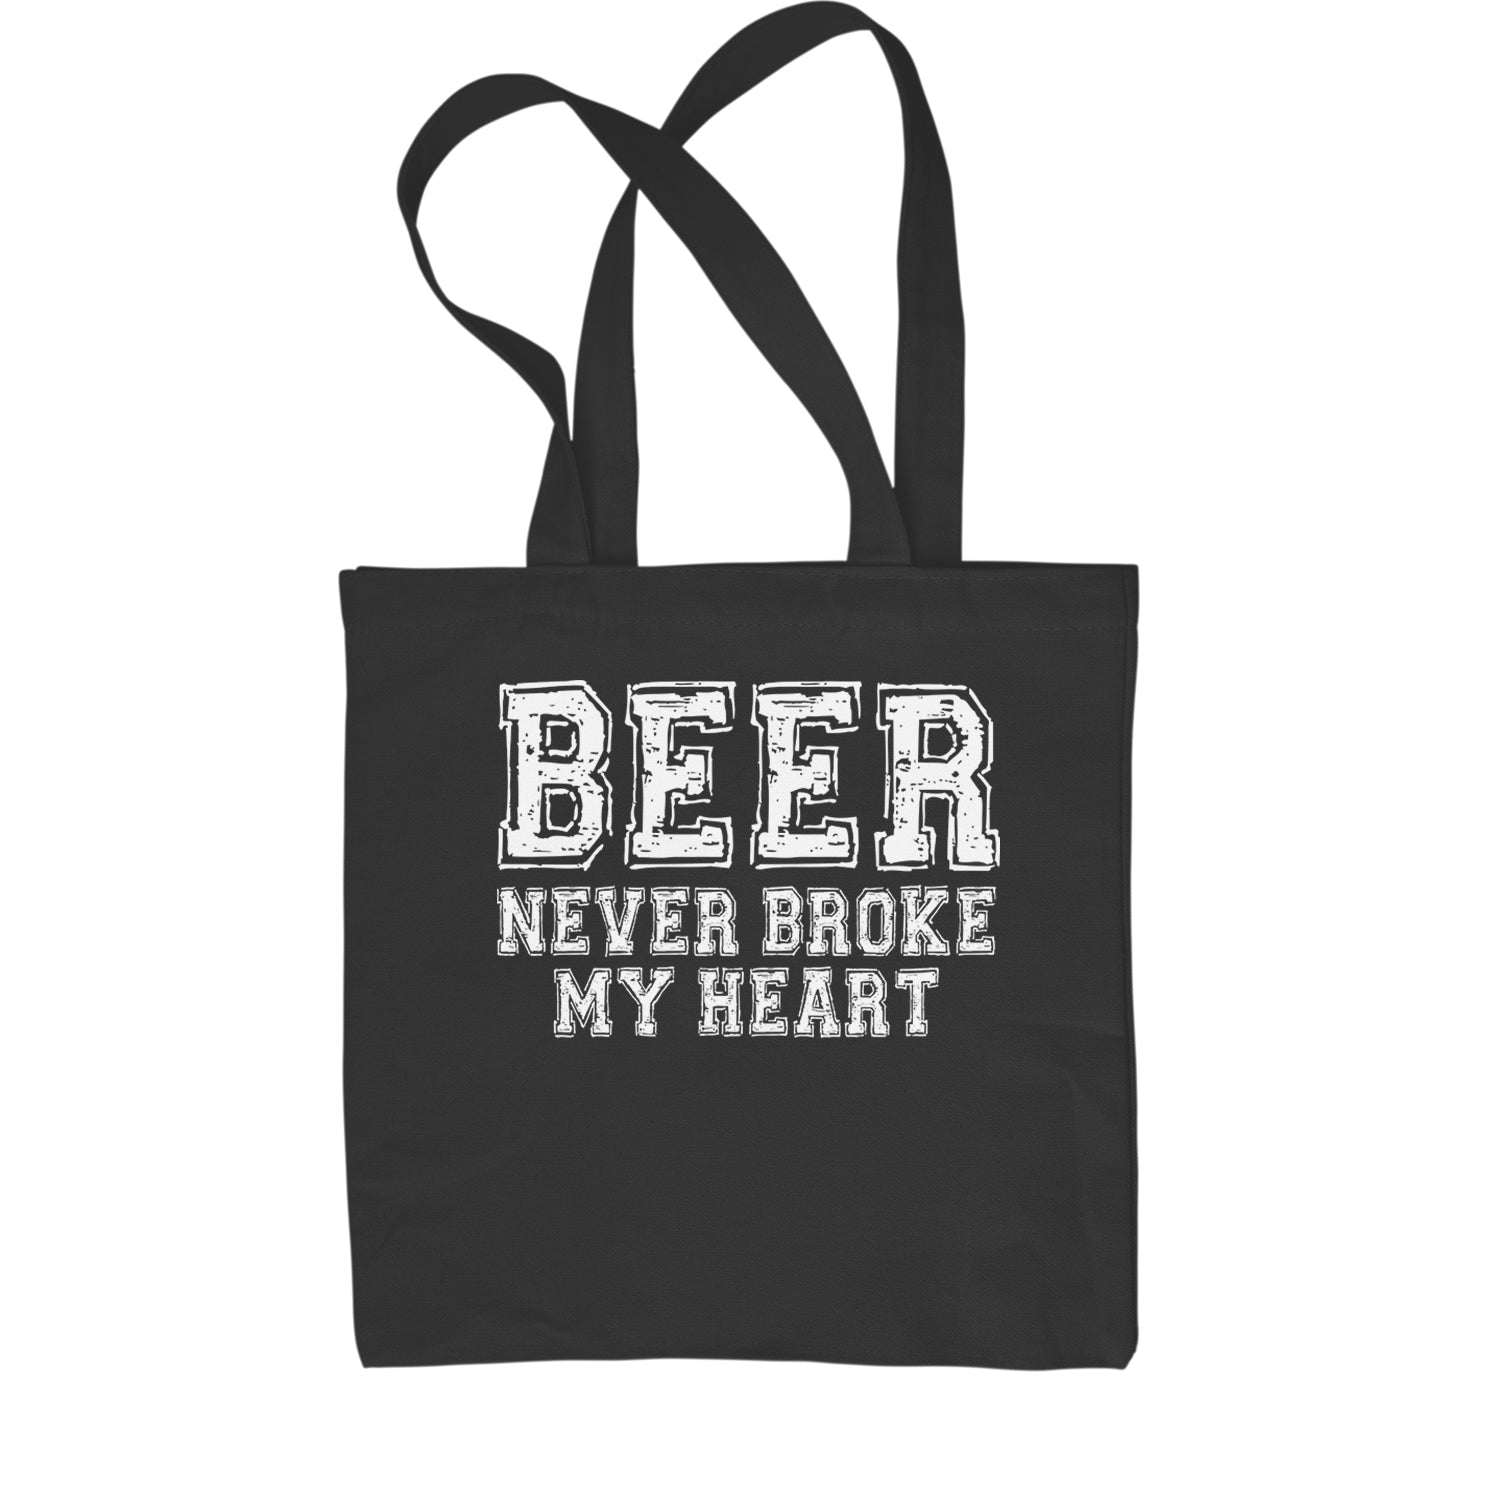 Beer Never Broke My Heart Funny Drinking Shopping Tote Bag